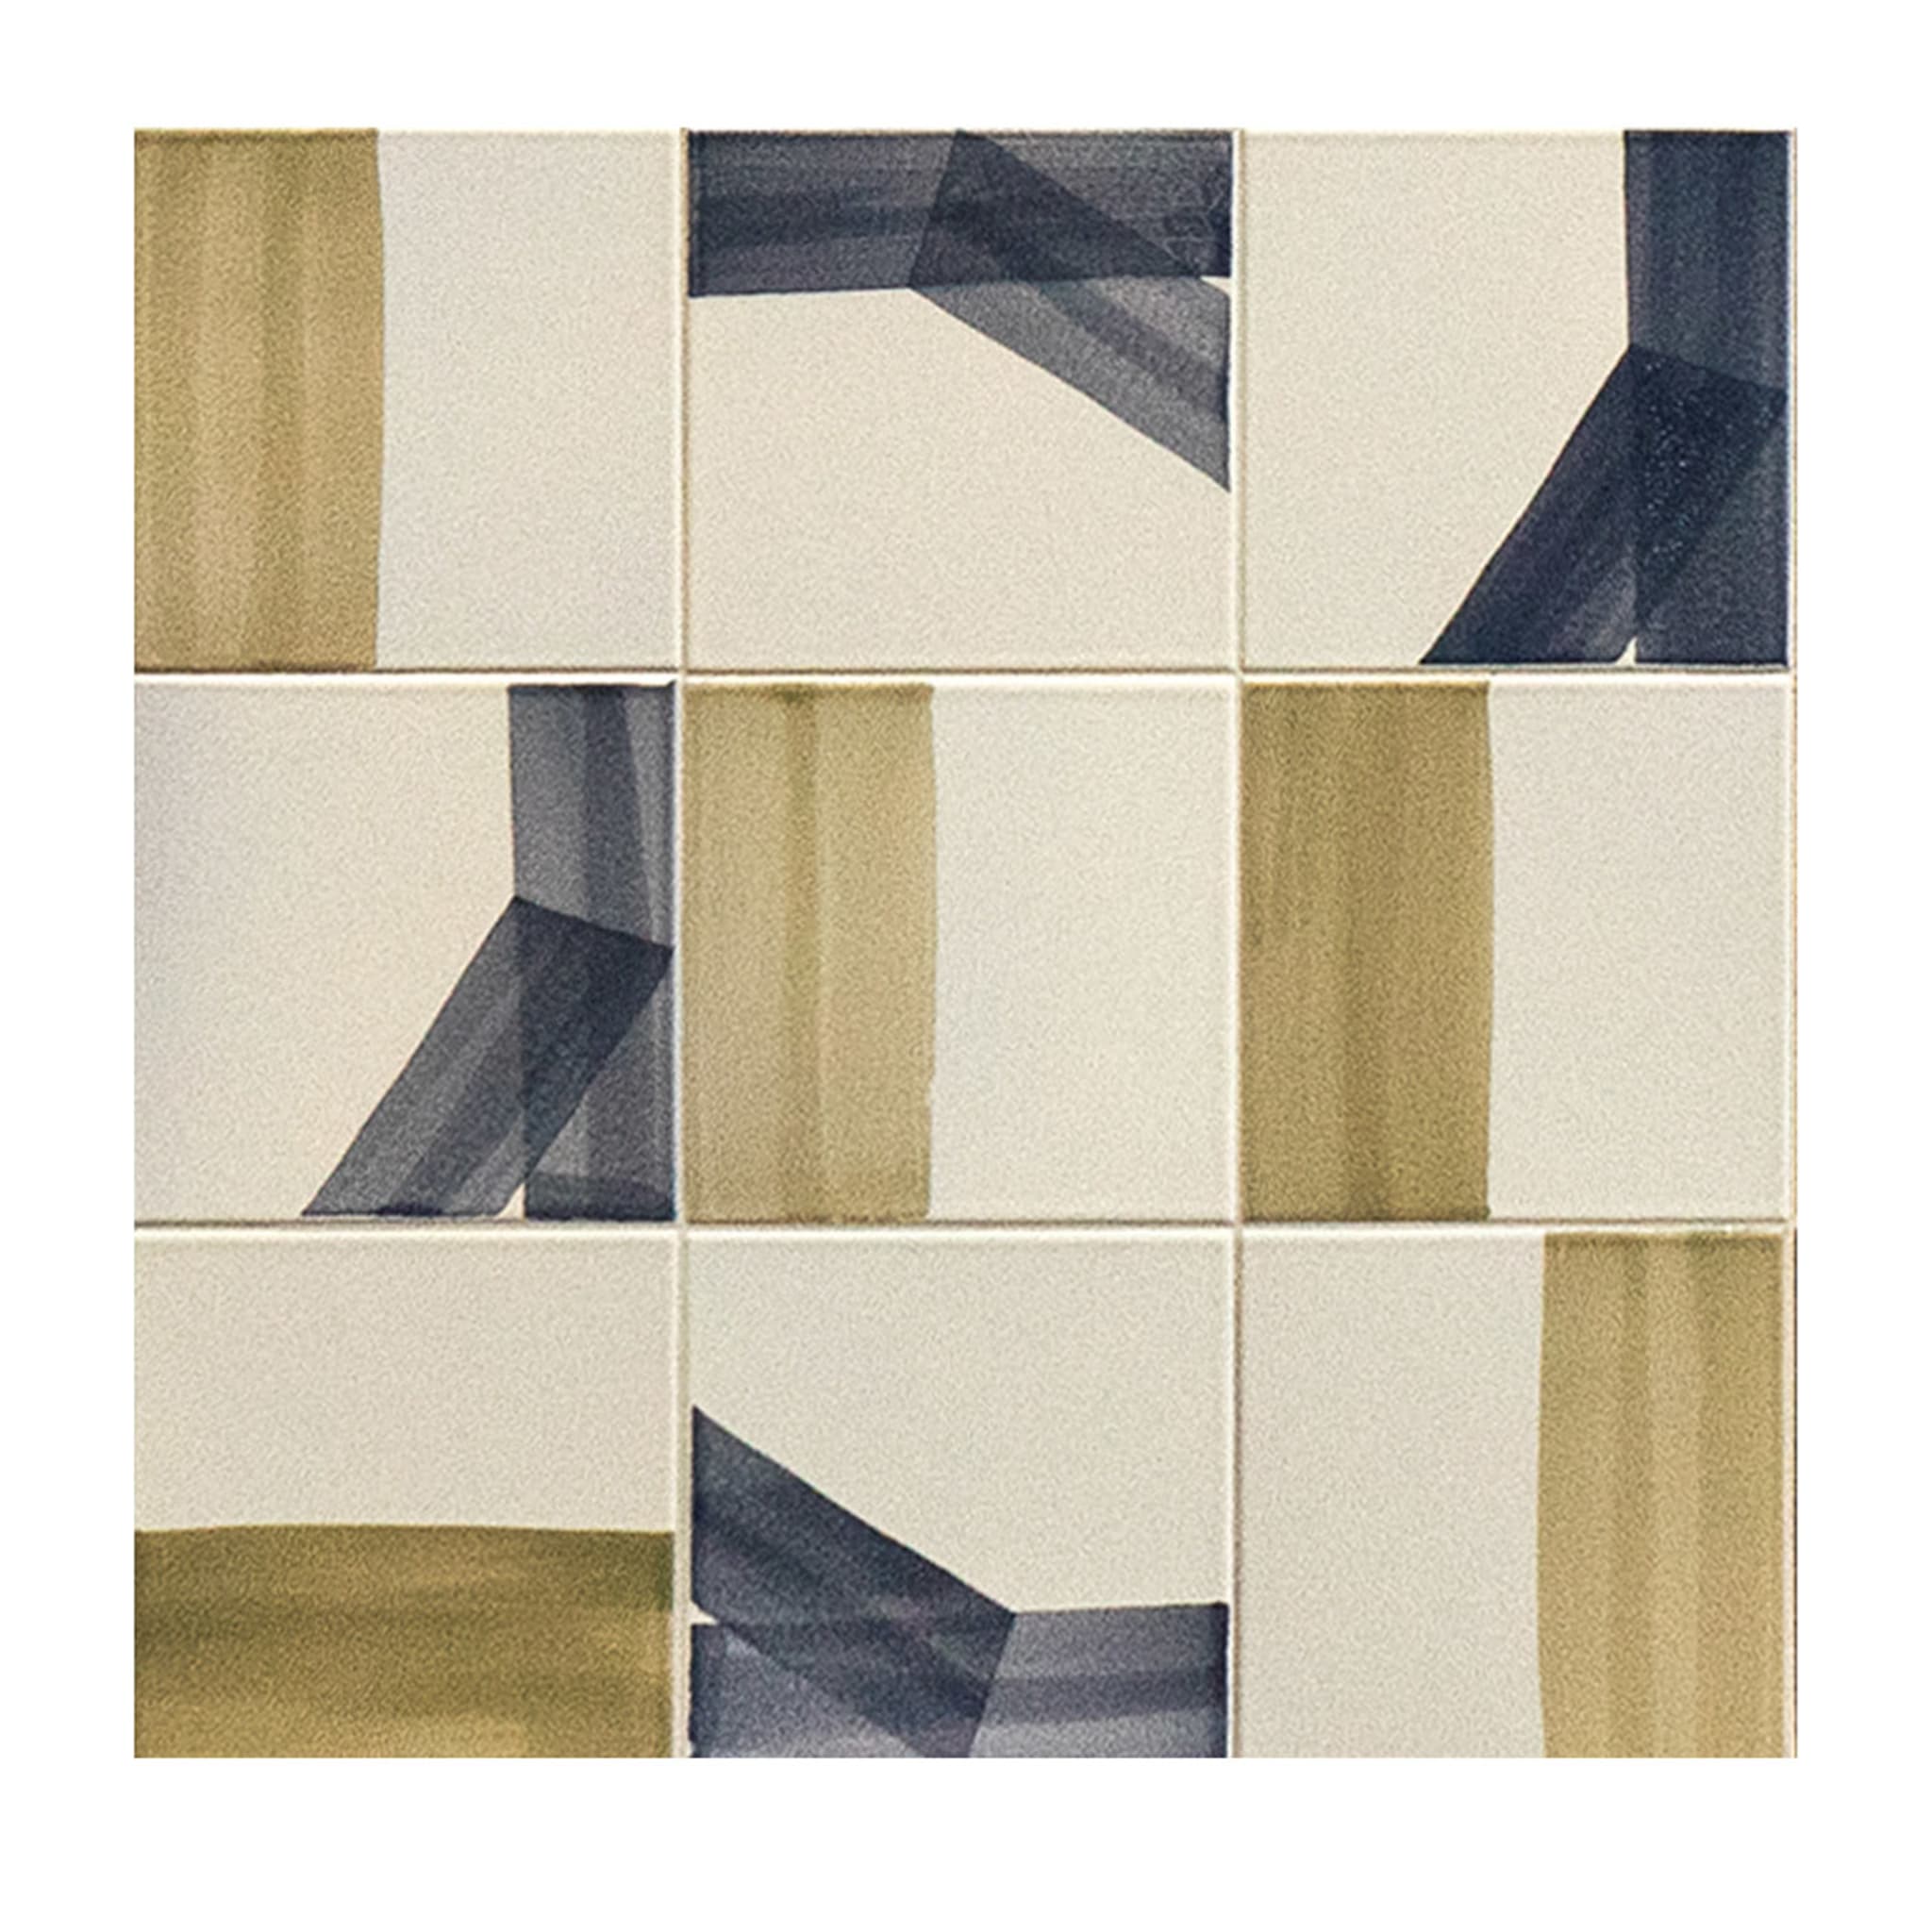 Tracce Set of 45 Green & Blue Tiles by Margherita Rui - Main view